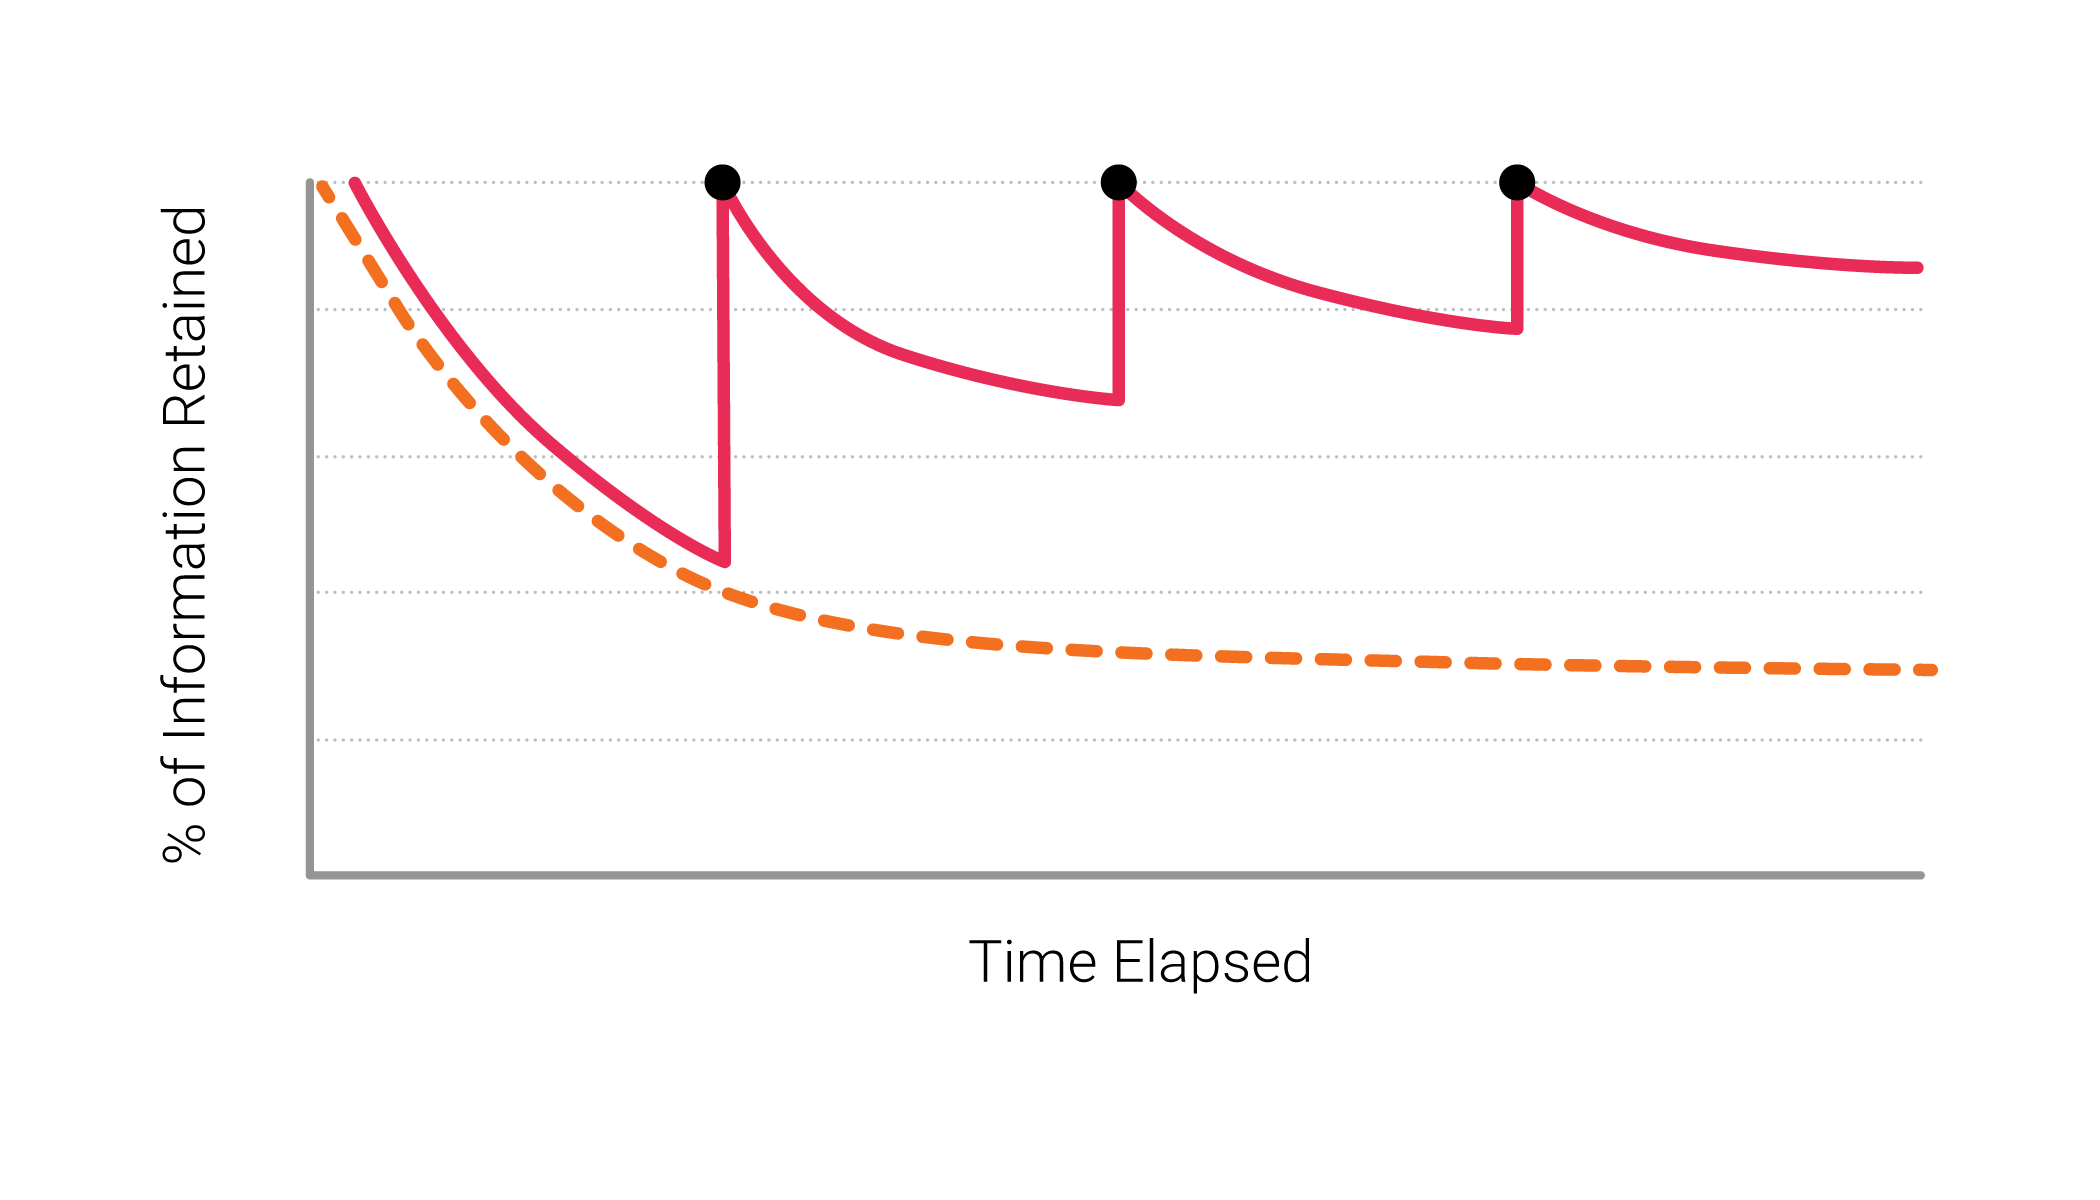 The Forgetting Curve - orange line showing drop in information retained over time. Pink line with multiple points over time helping to raise the amount of information retained over time.